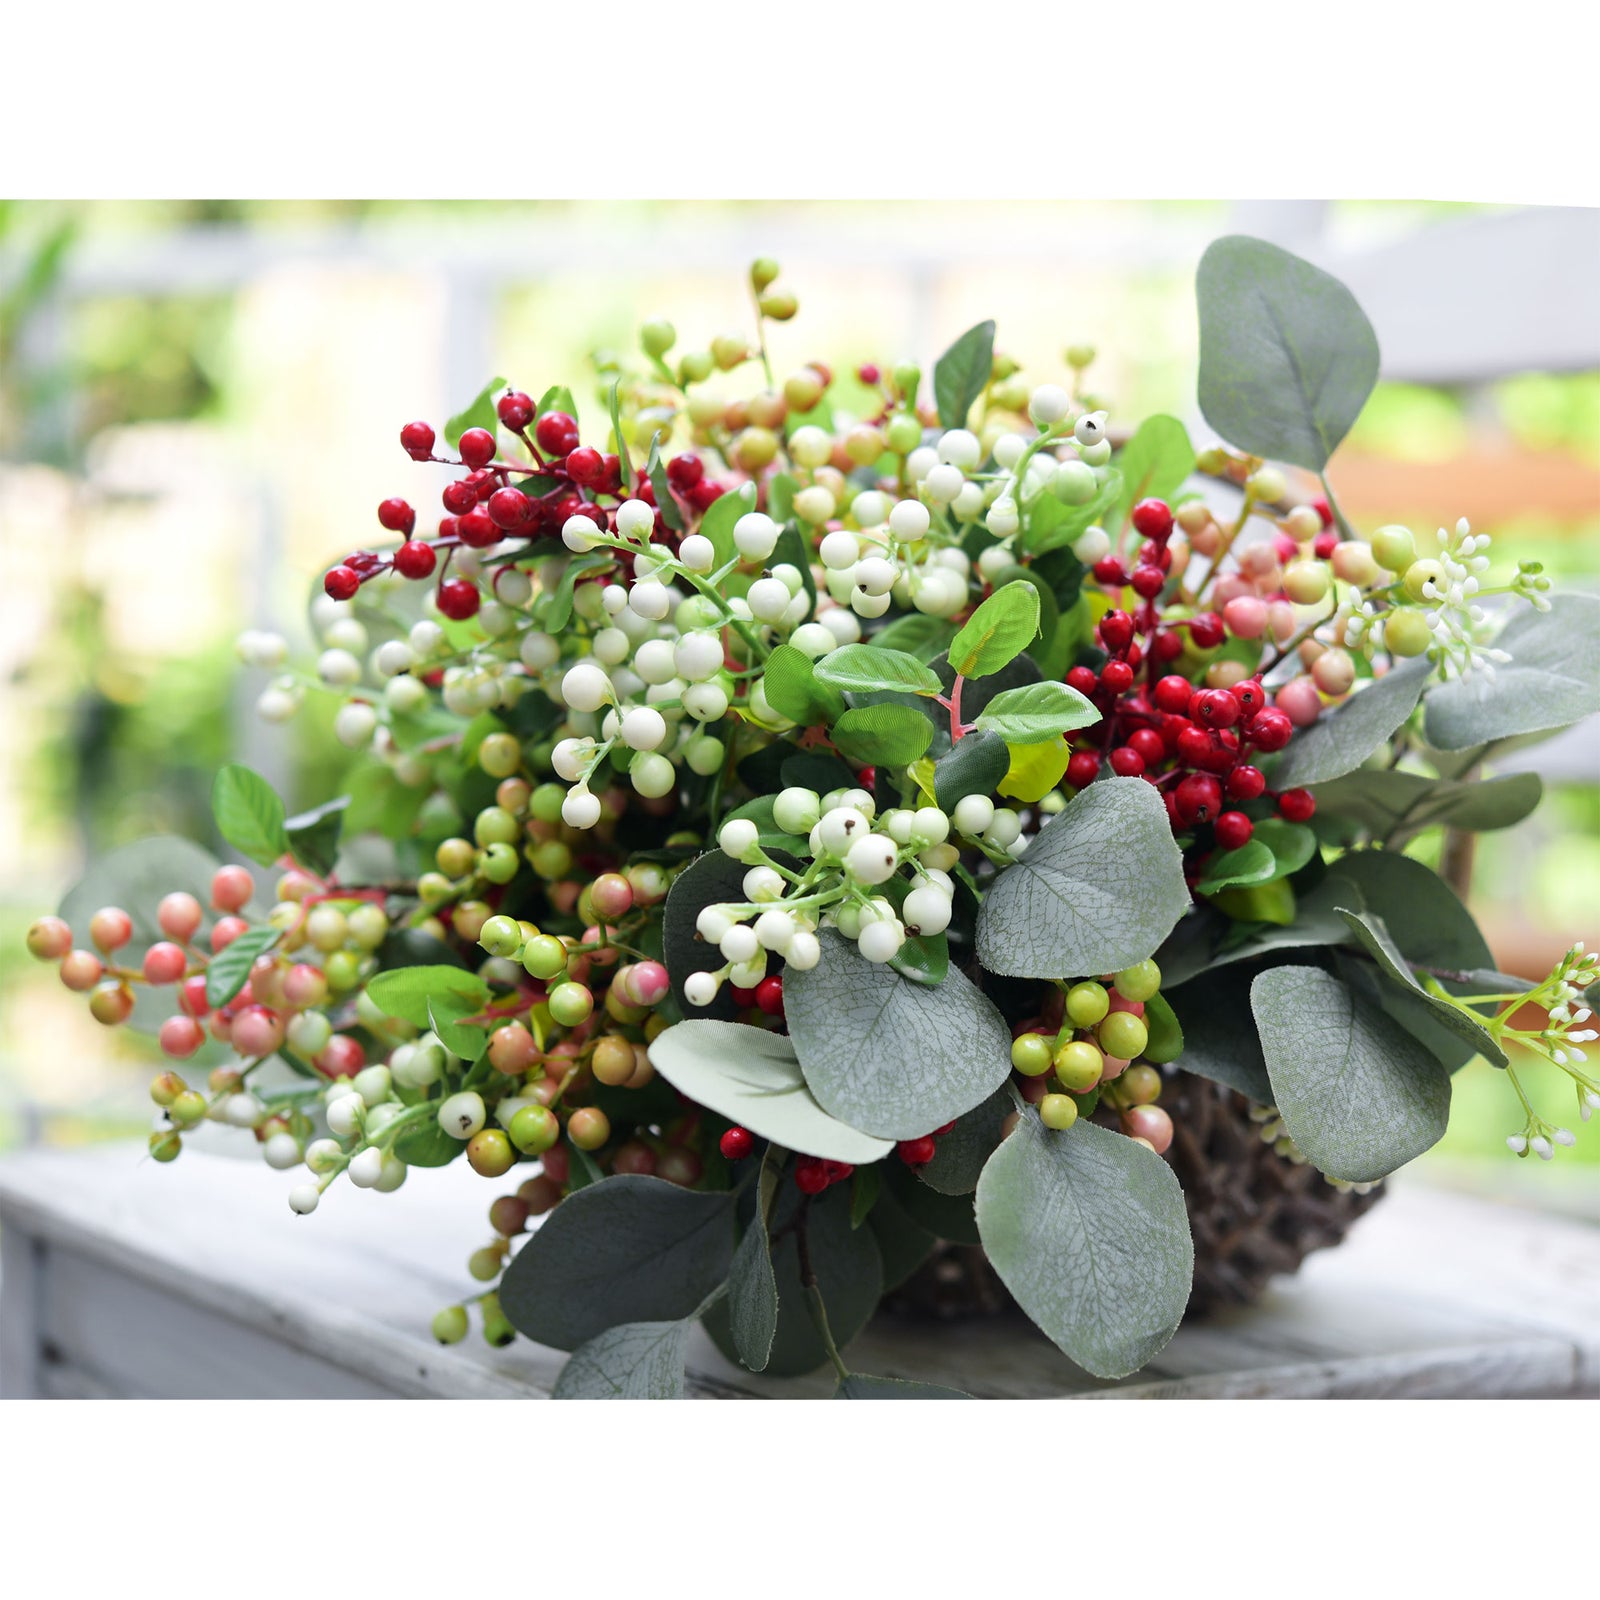 2pcs Christmas Berry Stems Artificial Holly Berries Branches Decoration  (Red) 